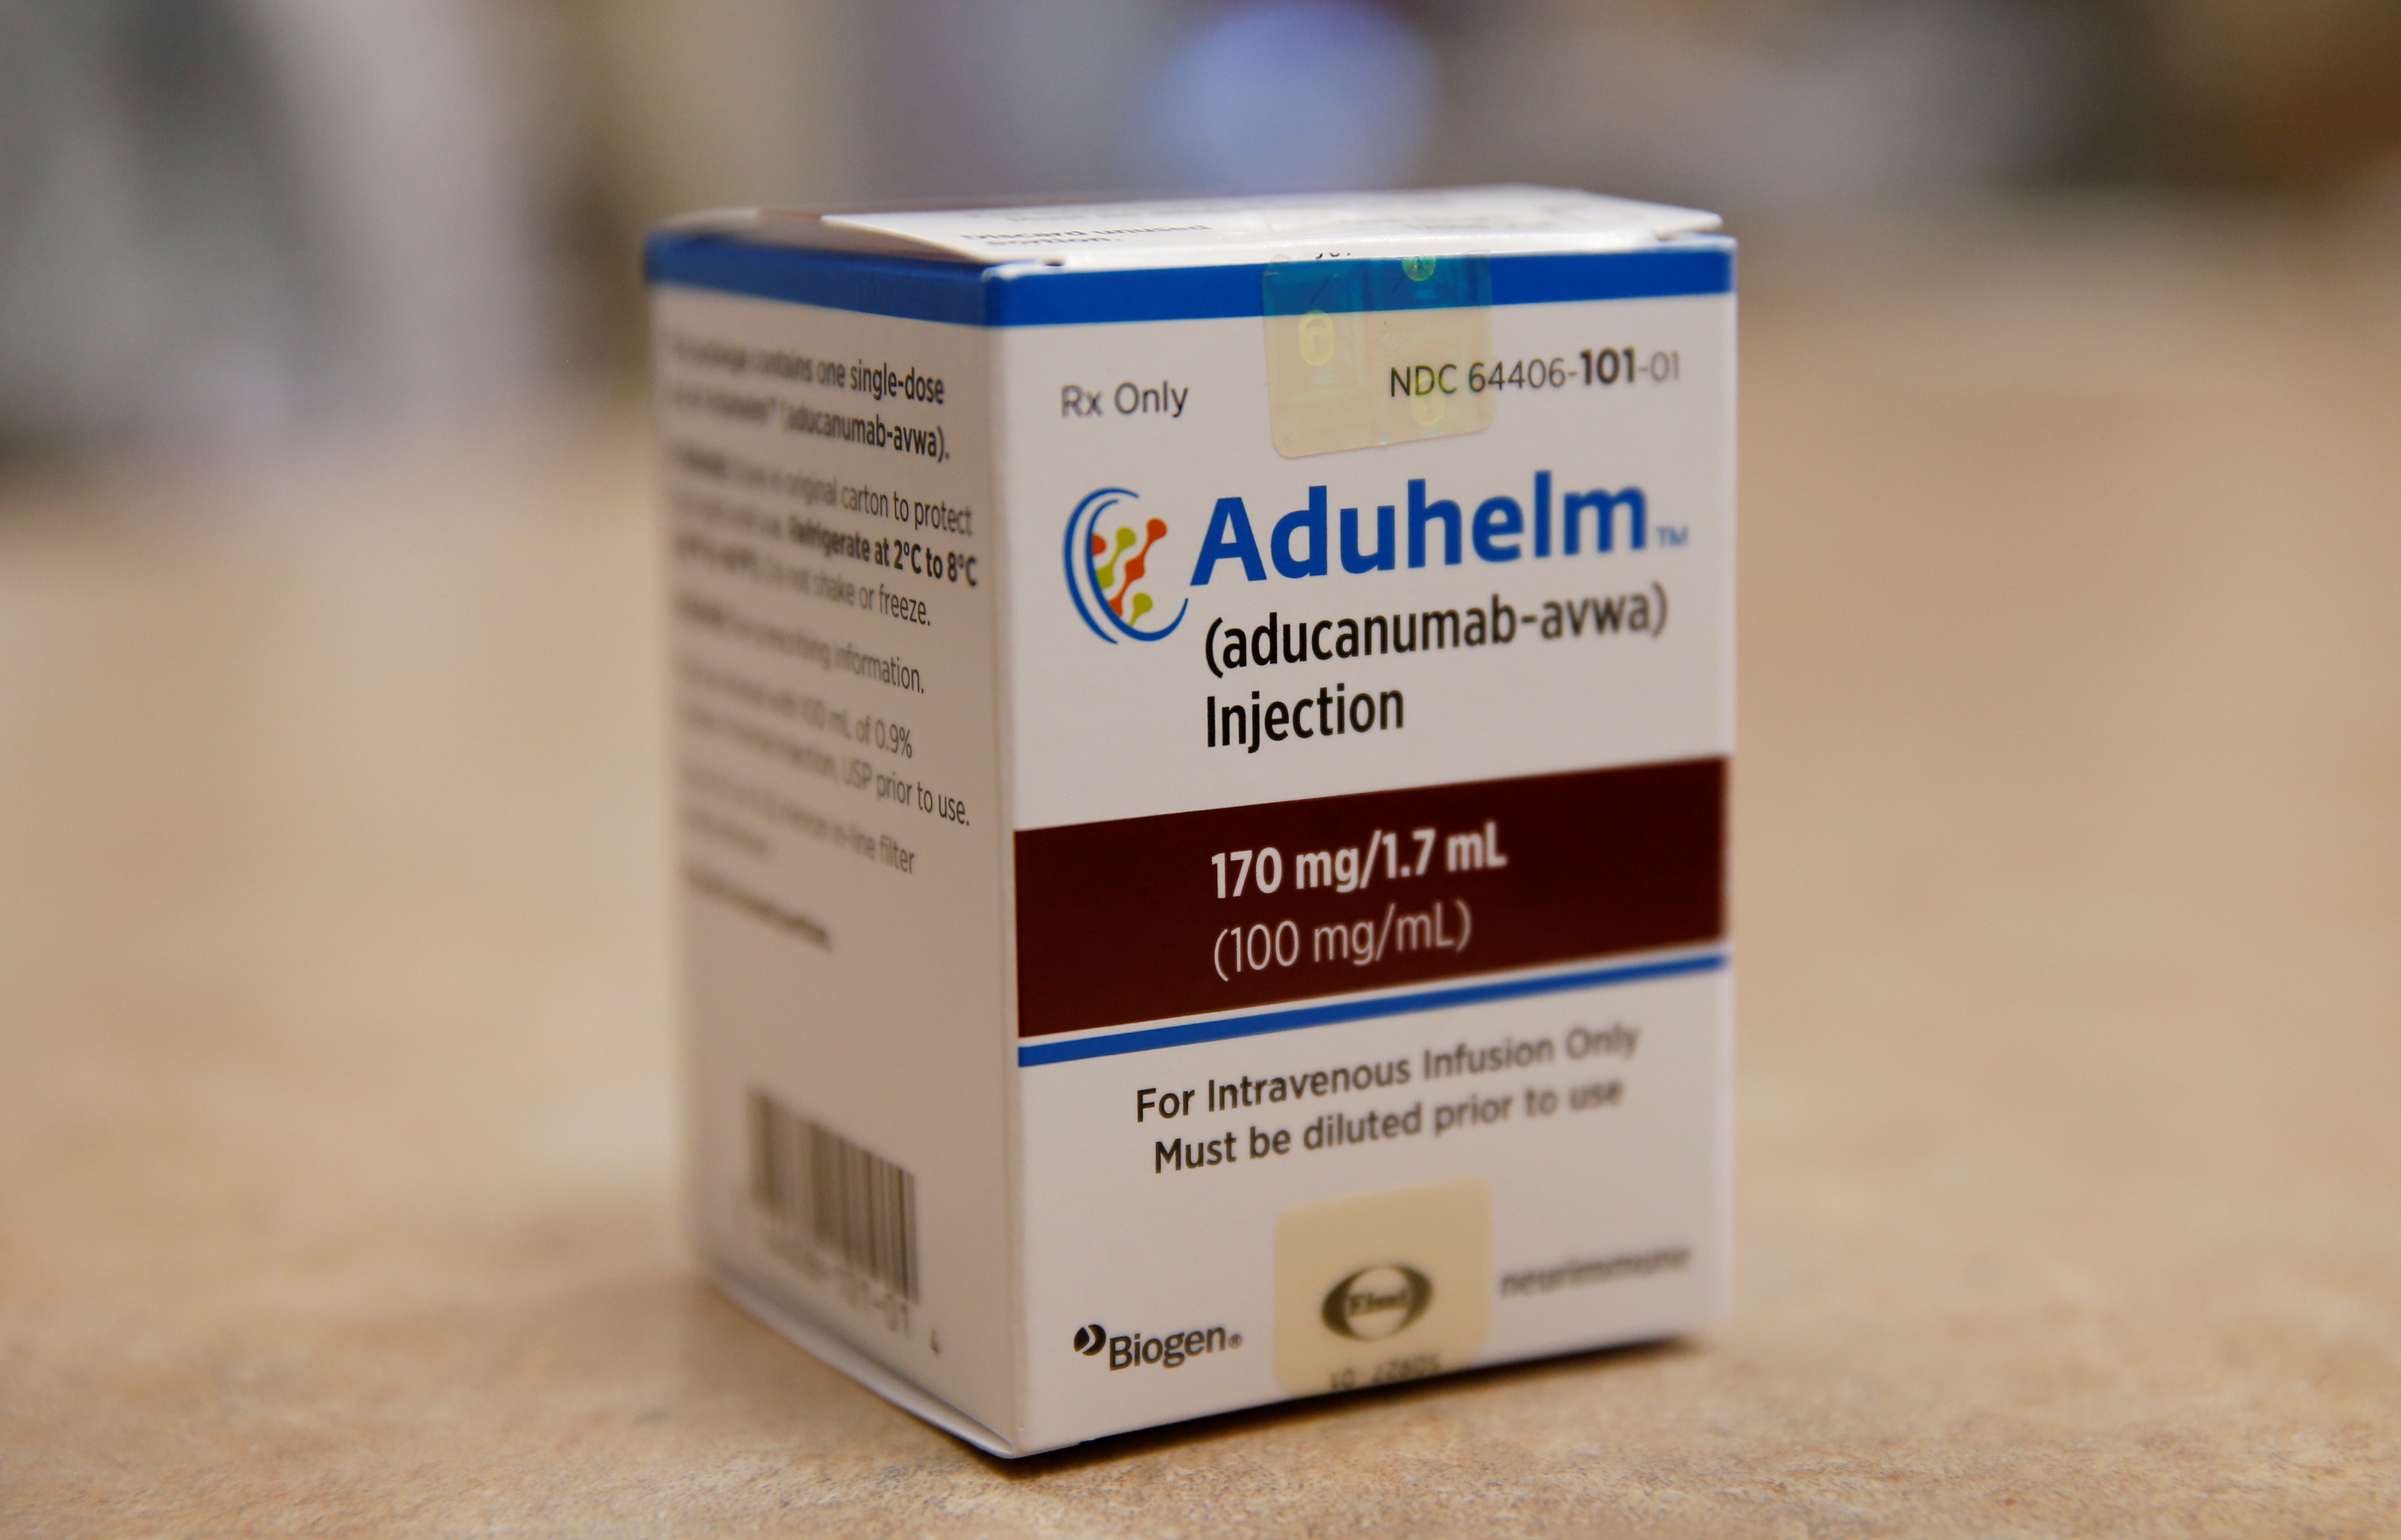 First intravenous infusion of Aduhelm, Biogen's controversial recently approved drug for early Alzheimer's disease